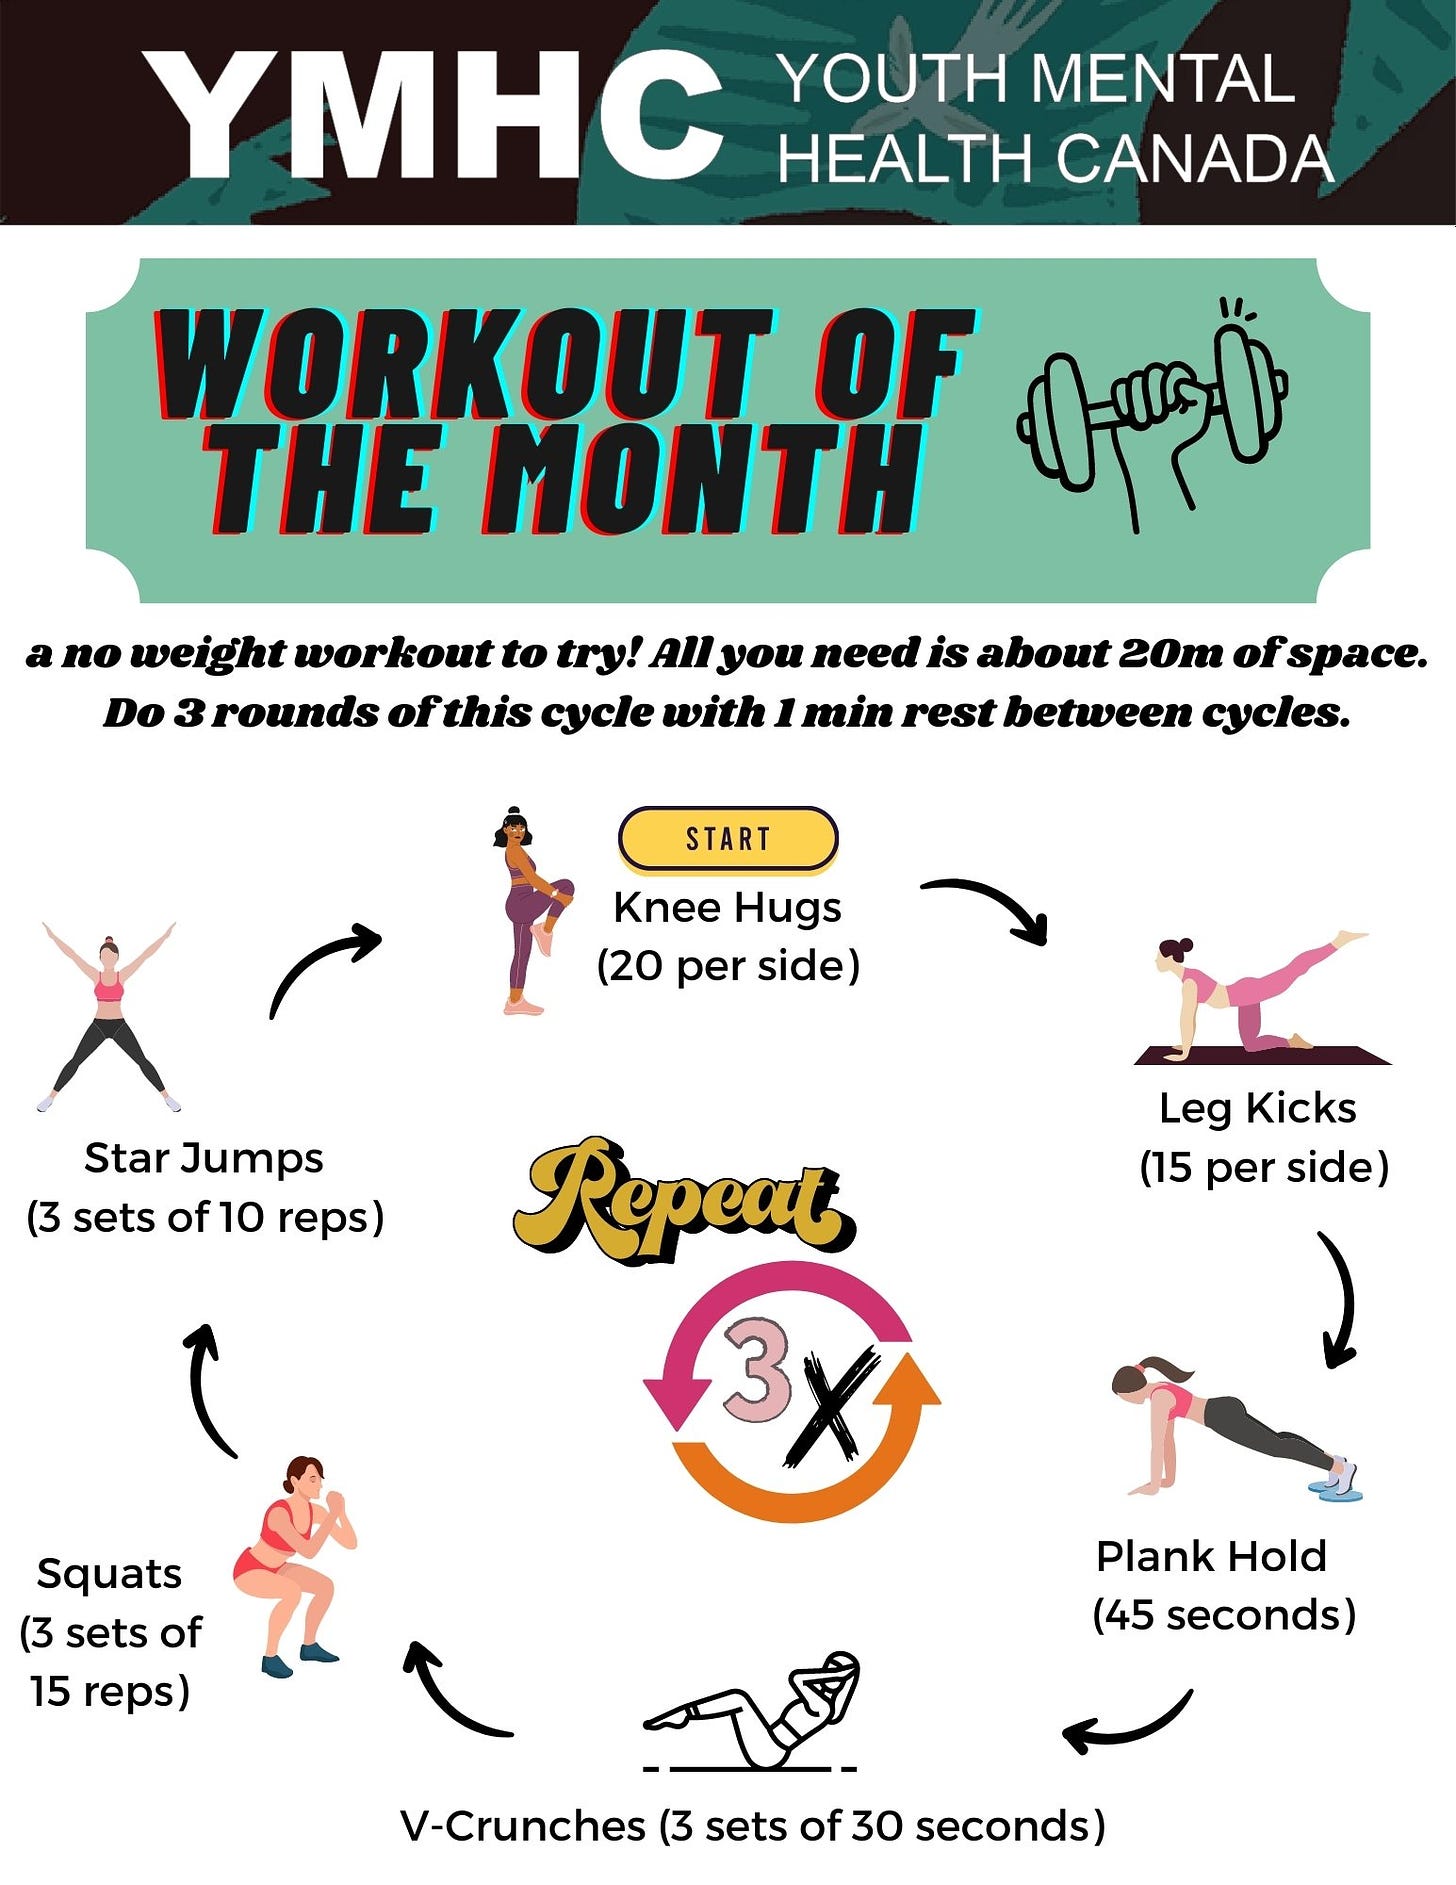 Knee Hugs (20 per side) V-Crunches (3 sets of 30 seconds) WORKOUT OF THE MONTH Star Jumps (3 sets of 10 reps) Squats (3 sets of 15 reps) Plank Hold   (45 seconds) Leg Kicks  (15 per side) a no weight workout to try! All you need is about 20m of space. Do 3 rounds of this cycle with 1 min rest between cycles.